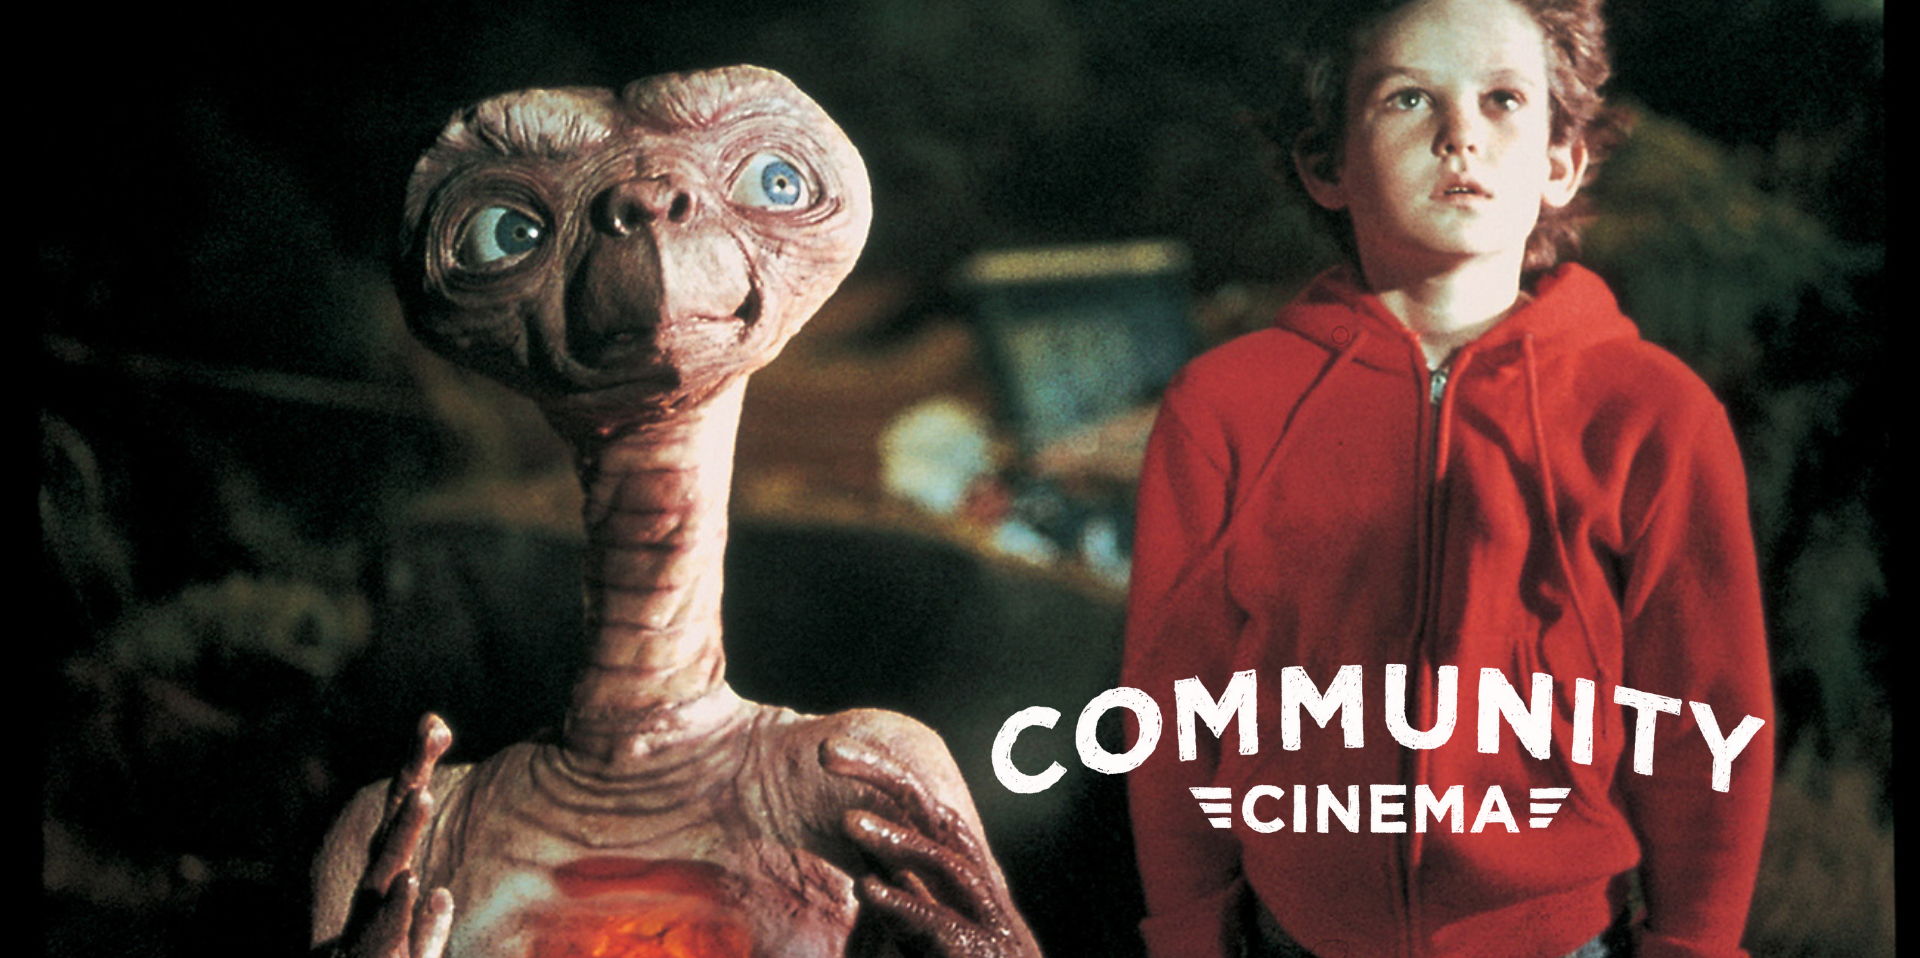 E.T. the Extra-Terrestrial (1982) - Community Cinema & Amphitheater promotional image